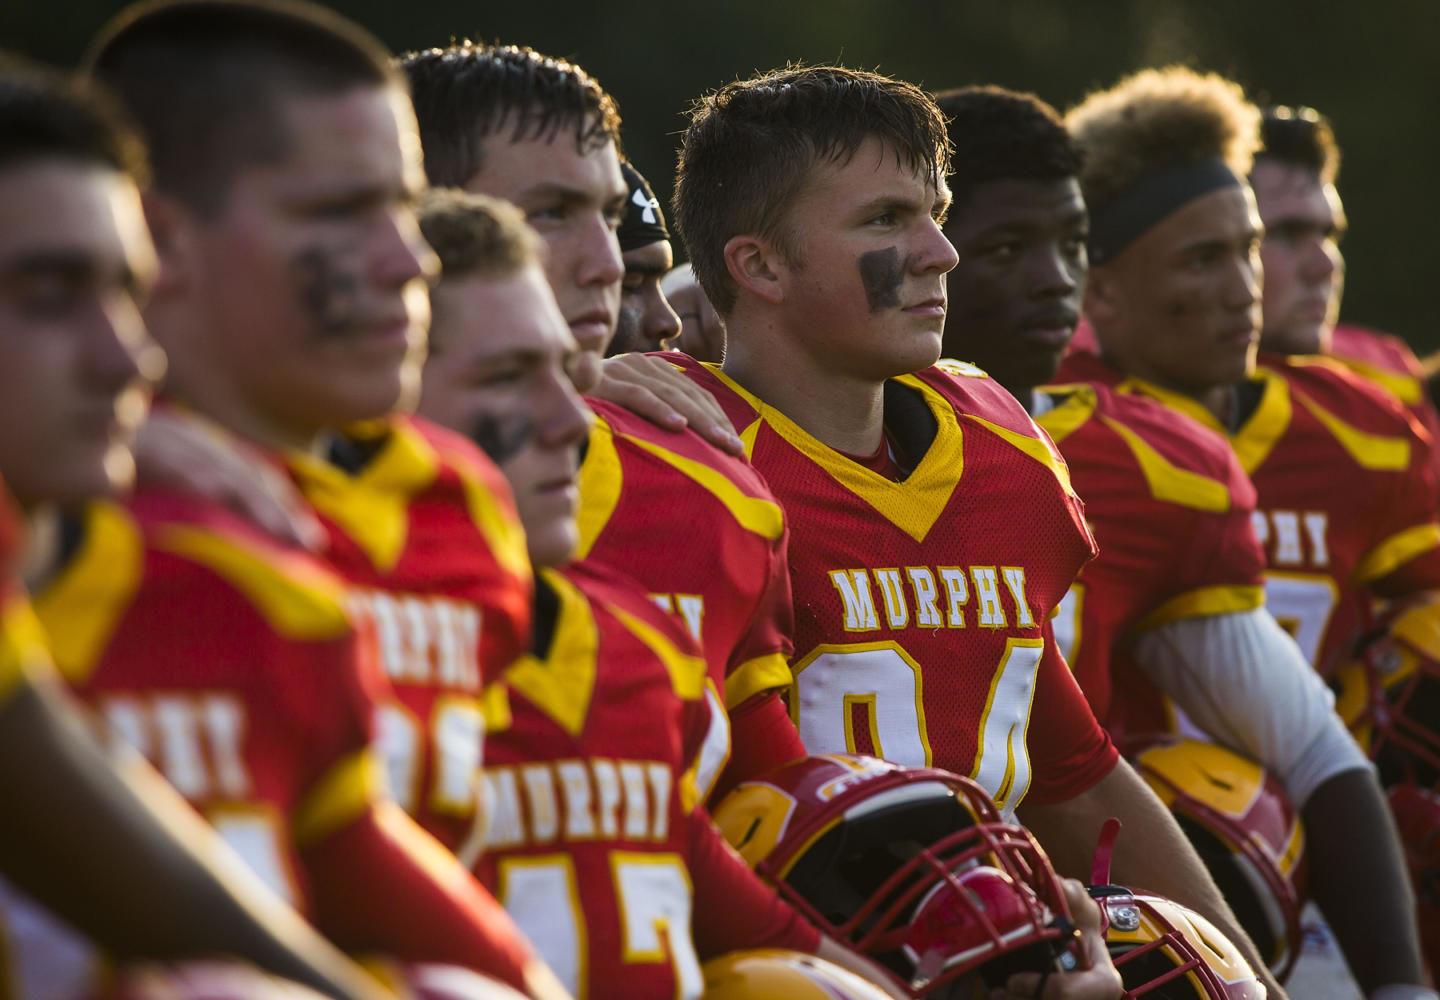 The Murphysboro Red Devils line up prior to kickoff of the 100th meeting between the Murphysboro Red Devils and the Carbondale Terriers on Friday, Aug. 25, 2017, at Doc Bencini Field, in Murphysboro, Illinois. (Ryan Michalesko | @photosbylesko)